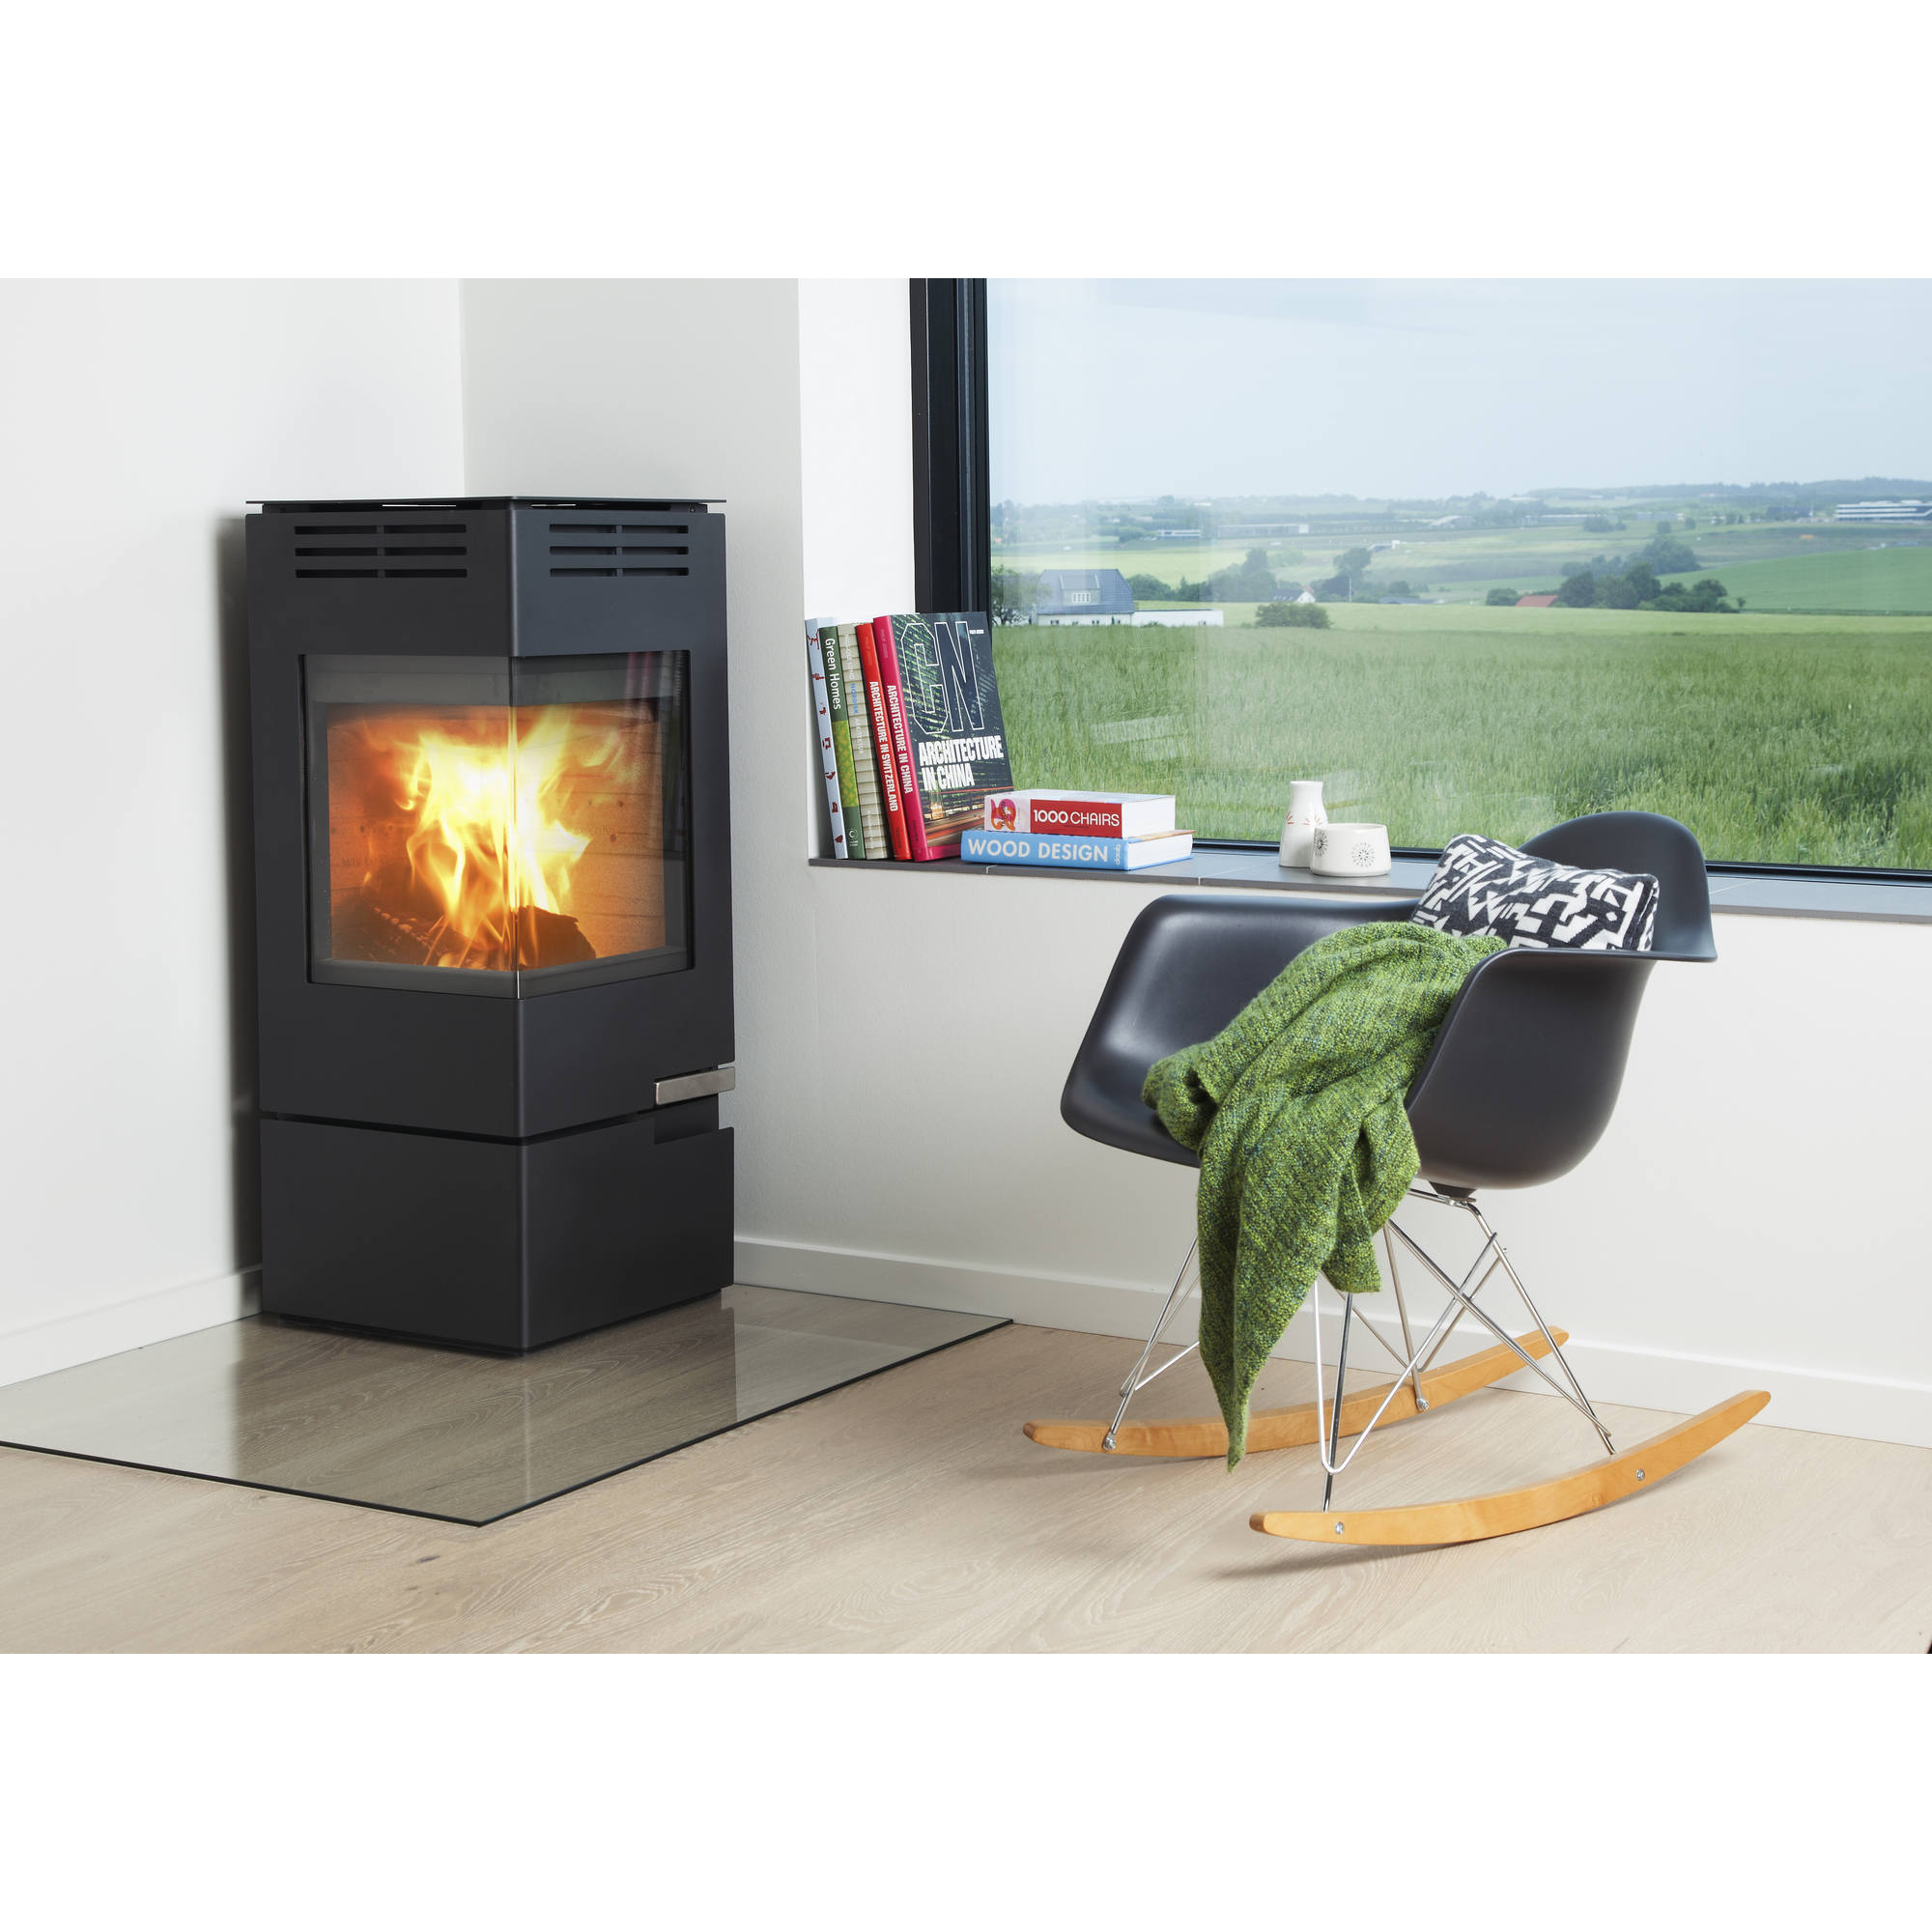 Kaminofen '12' Stahl 6 kW + product picture